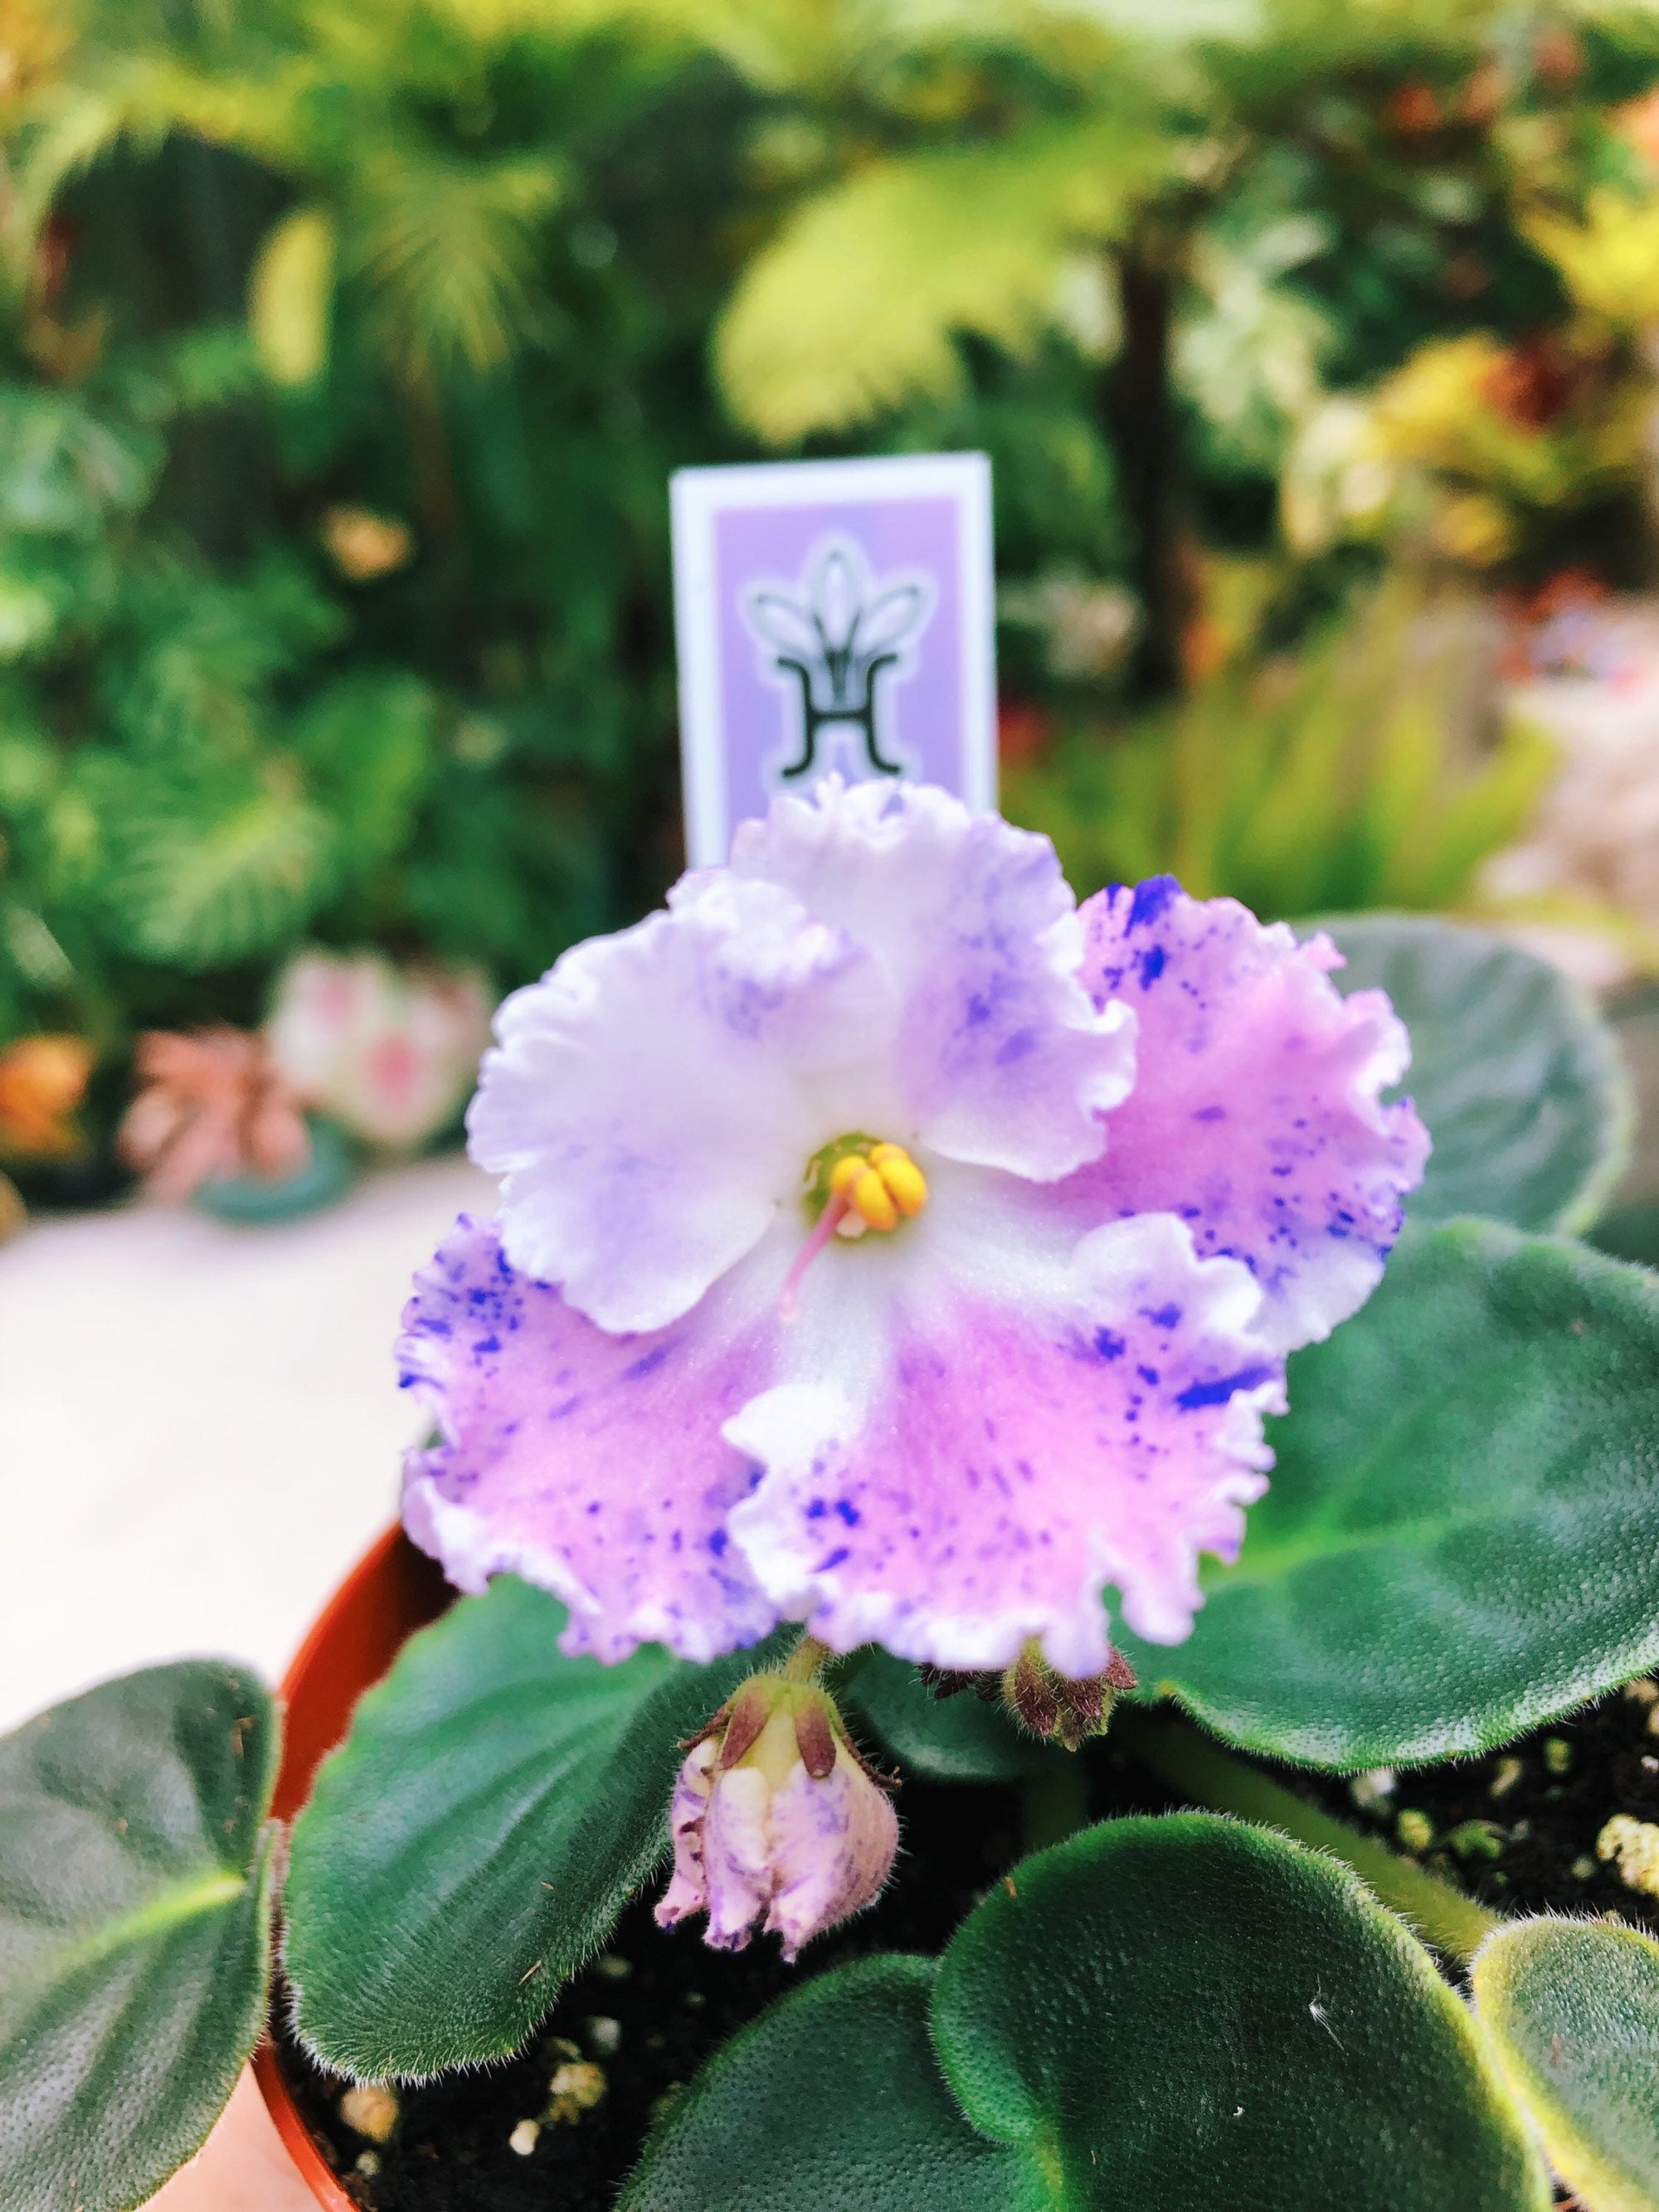 Live house plant variegated fantasy bloom African Violet Harmony’s ‘Snow Edelweiss’ garden 4” in flower Potted gift